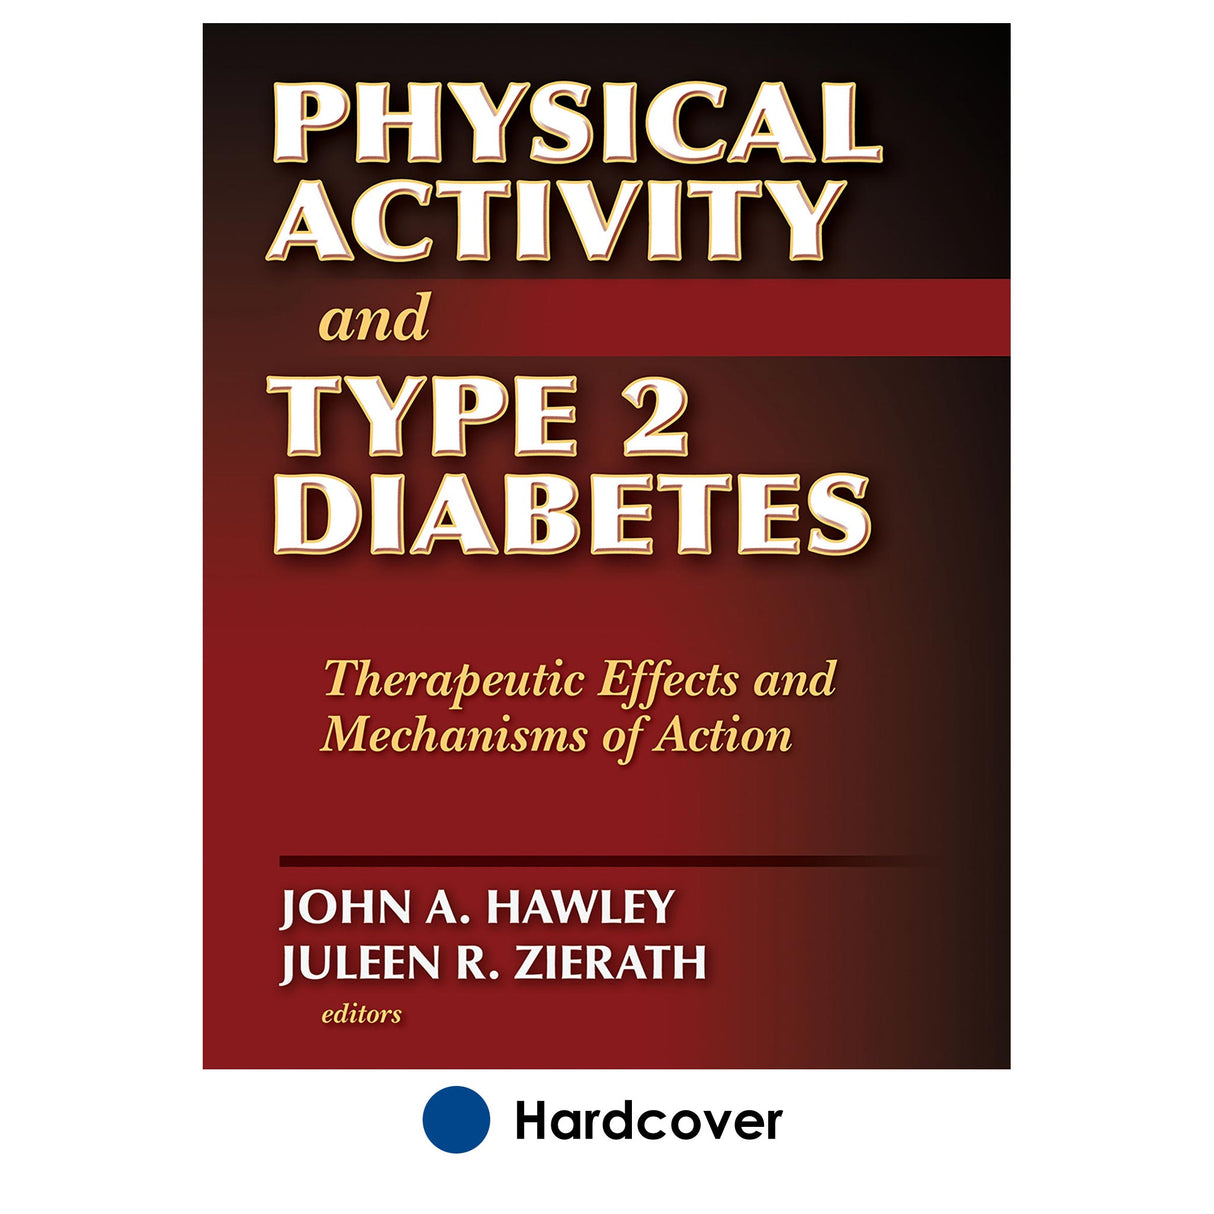 Physical Activity and Type 2 Diabetes